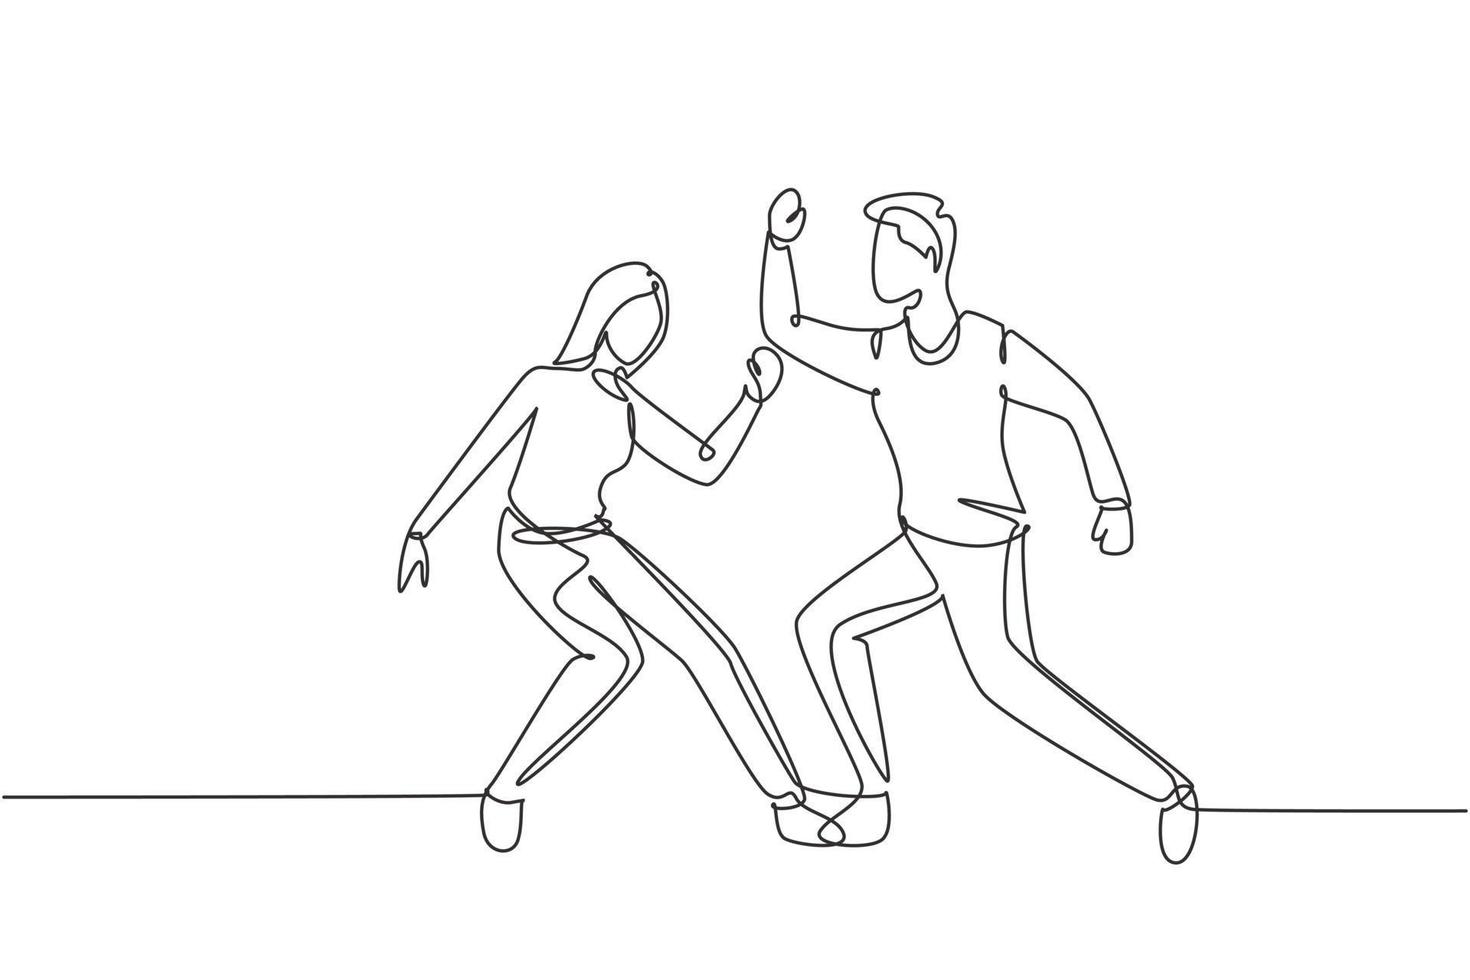 Continuous one line drawing man and woman dancing Lindy hop or Swing. Male and female characters performing dance at school or party. Fun lifestyle. Single line draw design vector graphic illustration